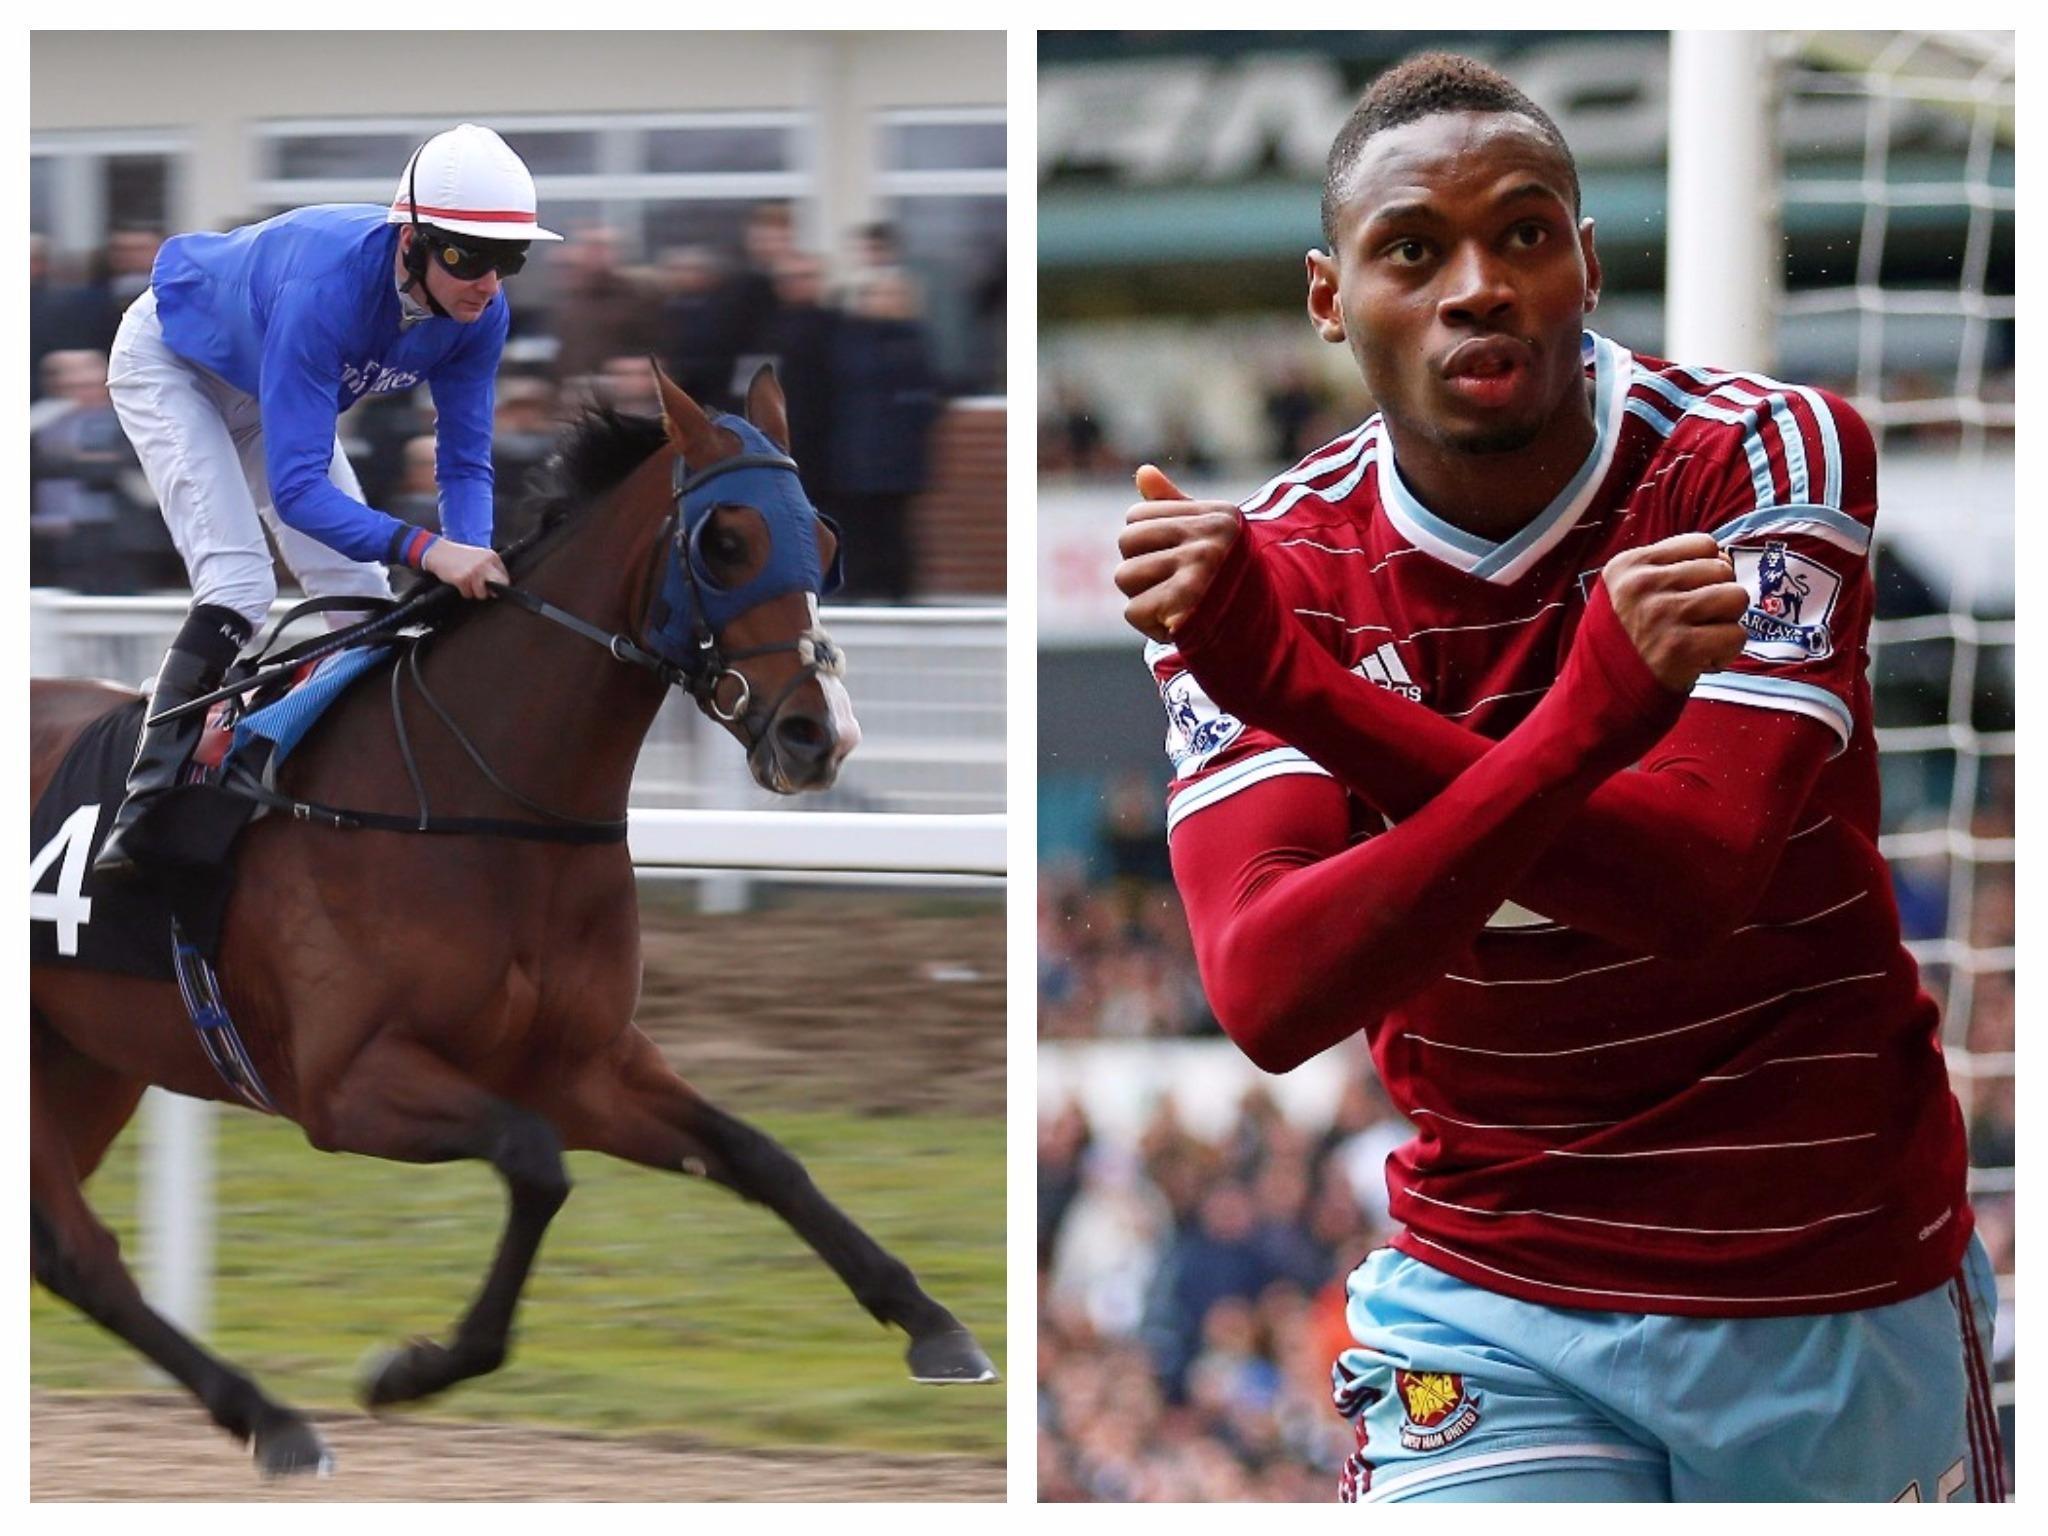 Diafra Sakho's agent watched his horse 'Siege of Boston' (not pictured) win in a photo finish